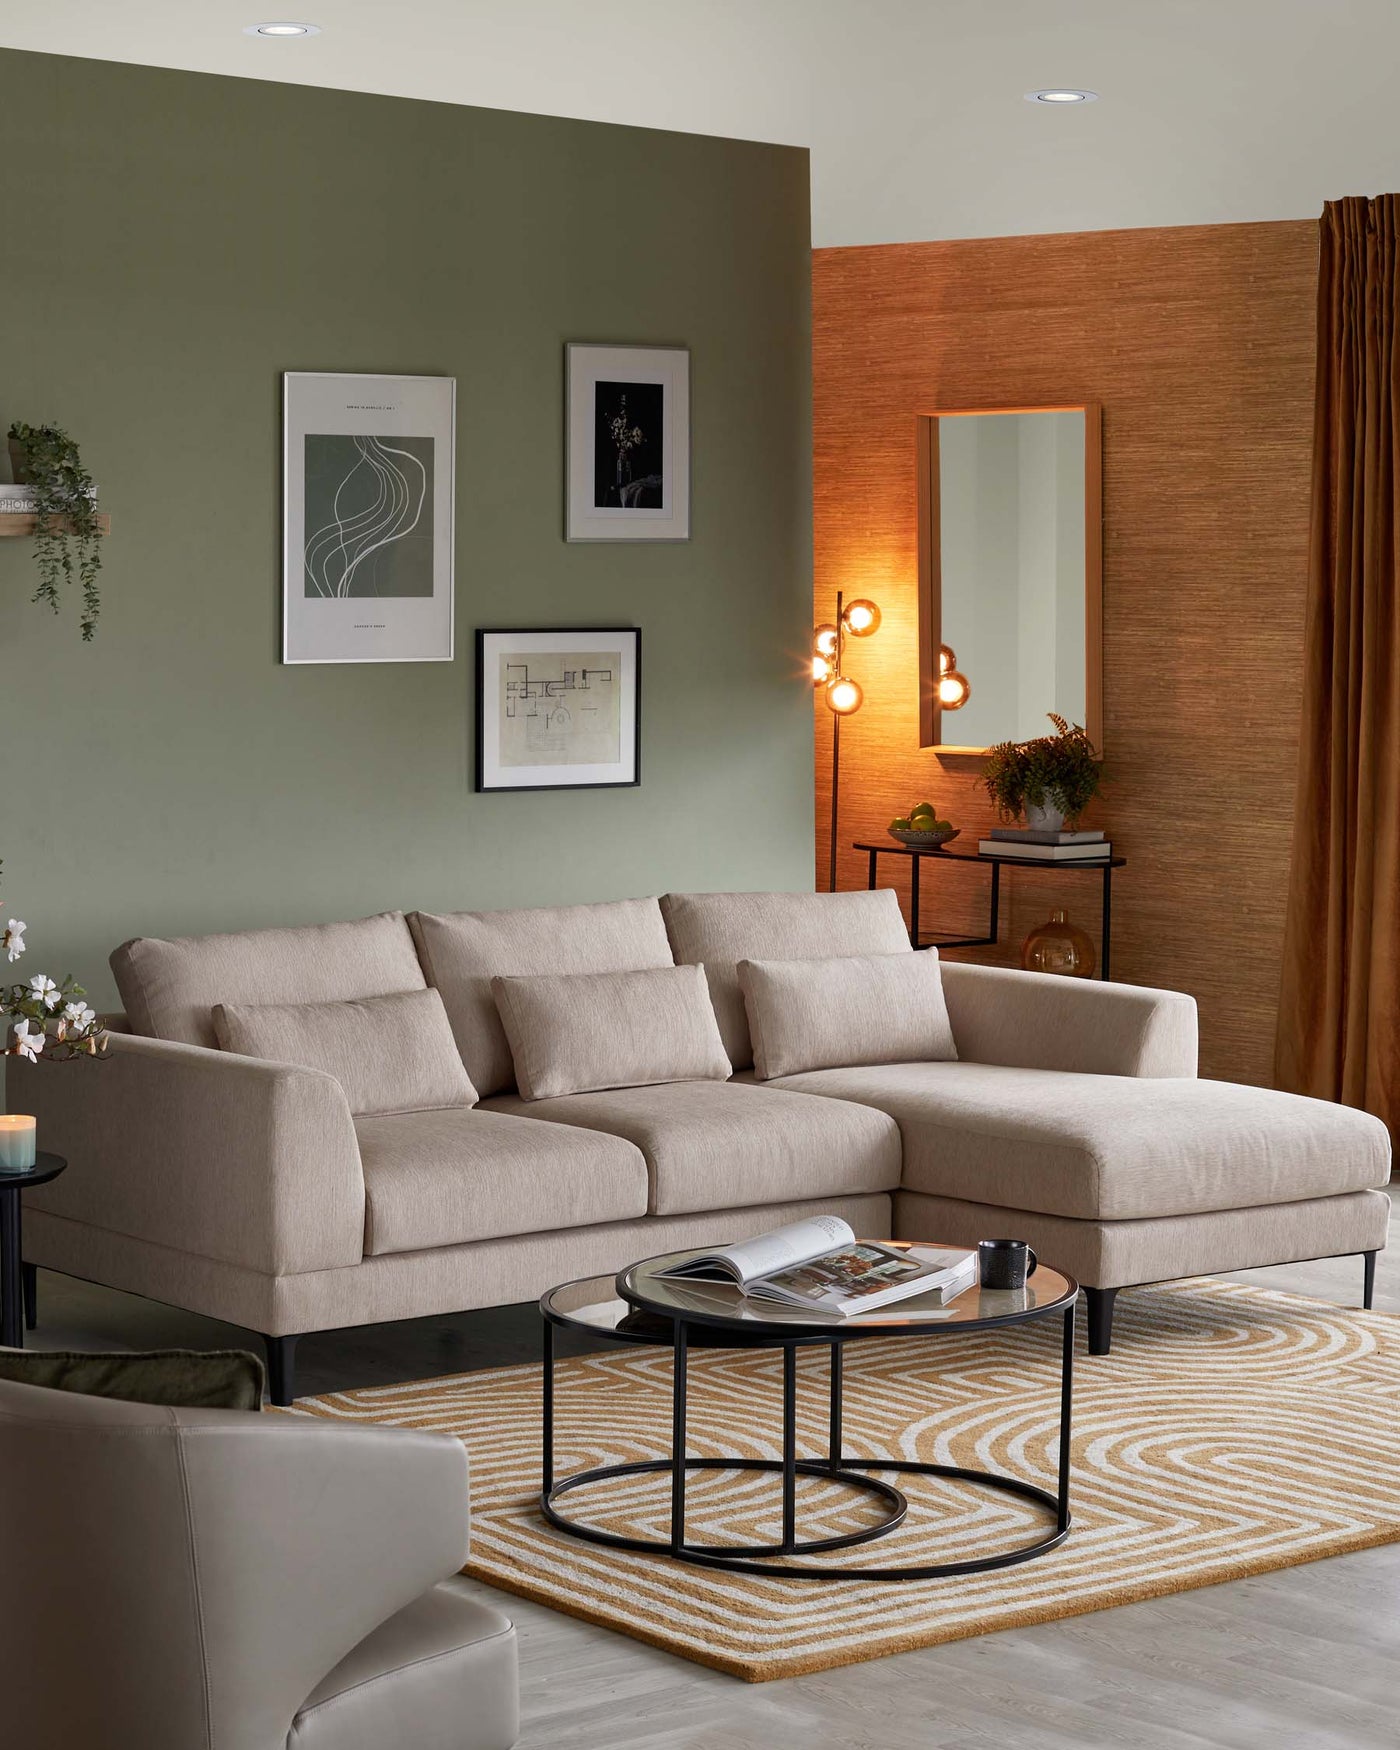 An elegant, contemporary living room setup featuring a beige L-shaped sectional sofa with plush back cushions and a chaise lounge end. A set of round nesting coffee tables with black metal frames and glass tops sits on a beige and yellow patterned area rug. An accent side table with a dark top and matching black legs is placed beside a minimalist wooden console with a large mirror above it. The room conveys a warm and inviting atmosphere with tasteful decor.